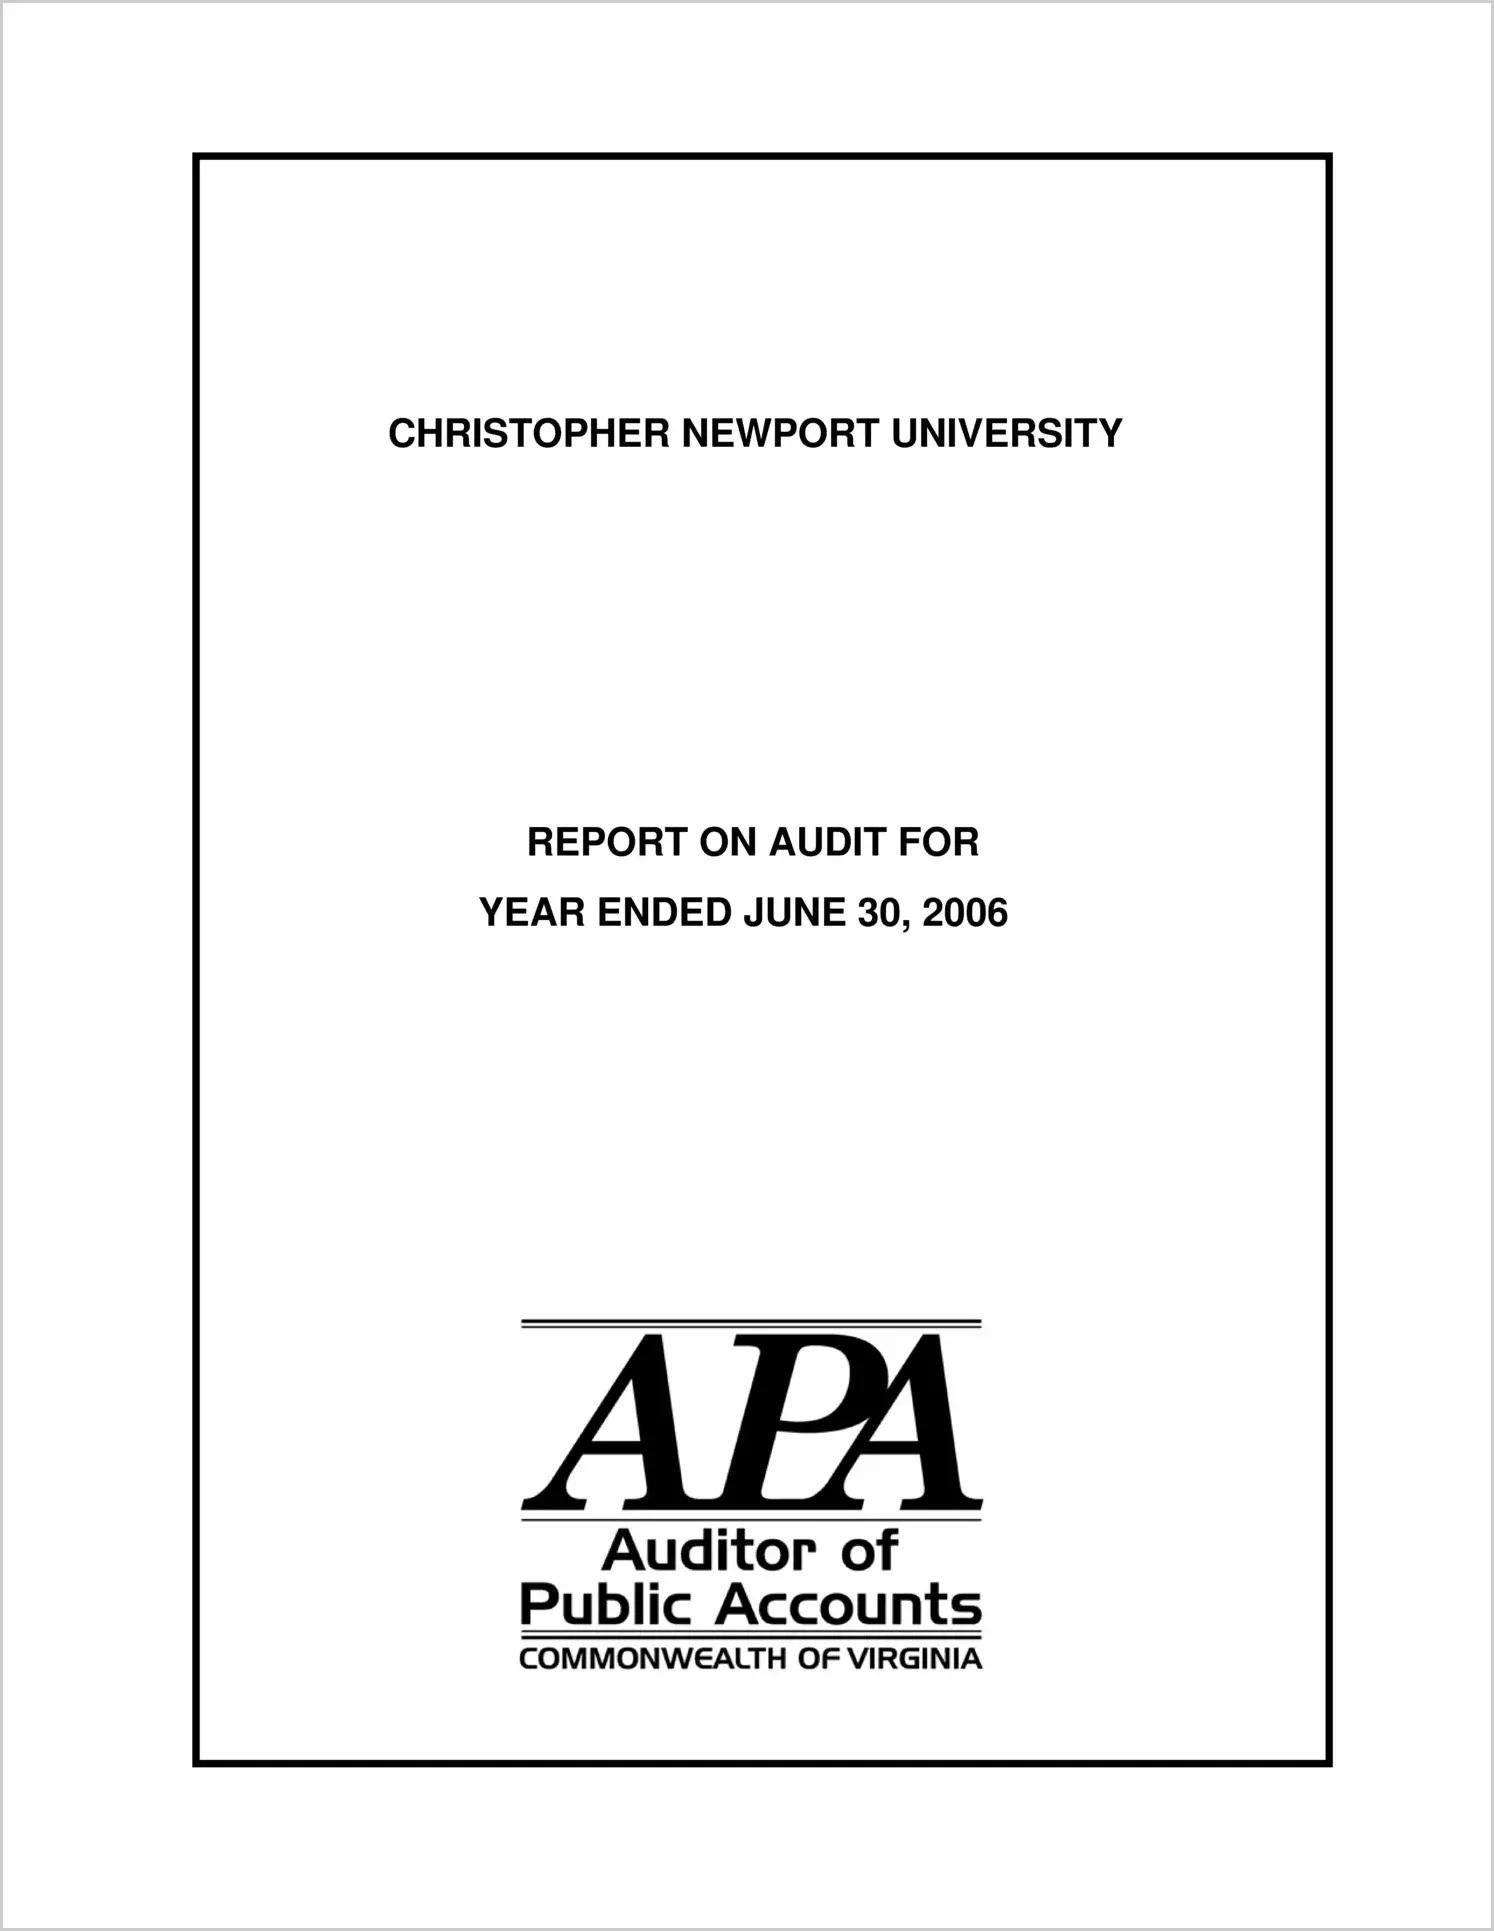 Christopher Newport University for the year ended June 30, 2006